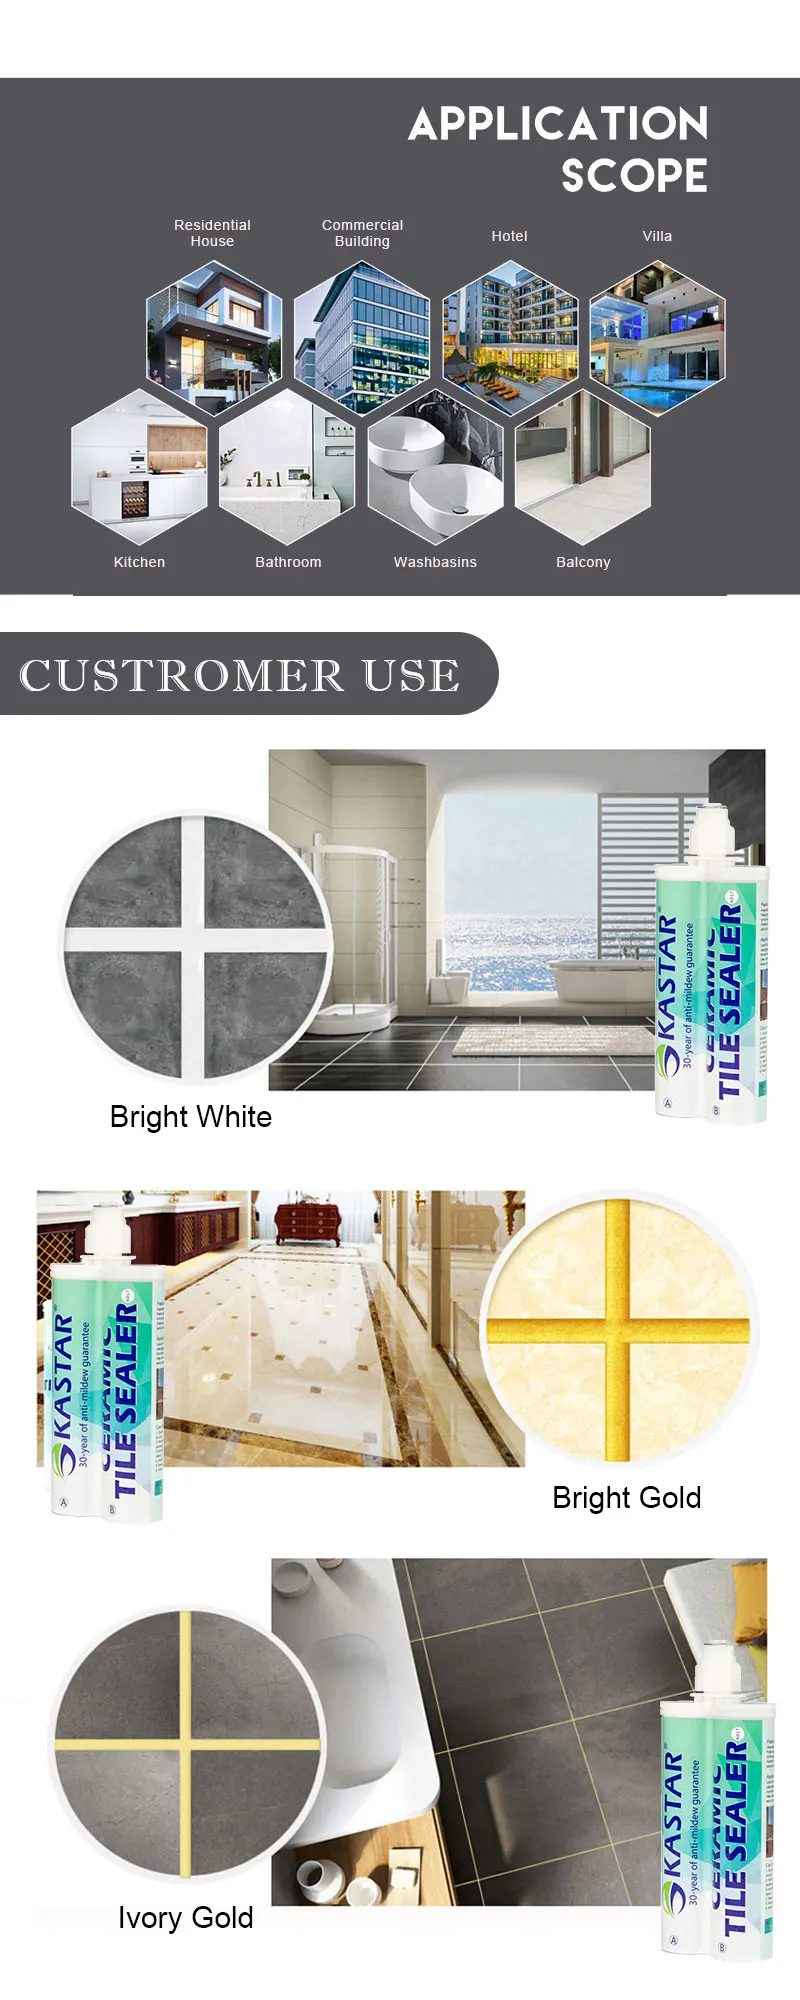 China Wholesale Colored Waterproof Two Part Mixer Adhesive Sealant Glue Epoxy Tile Grout For Bathroom